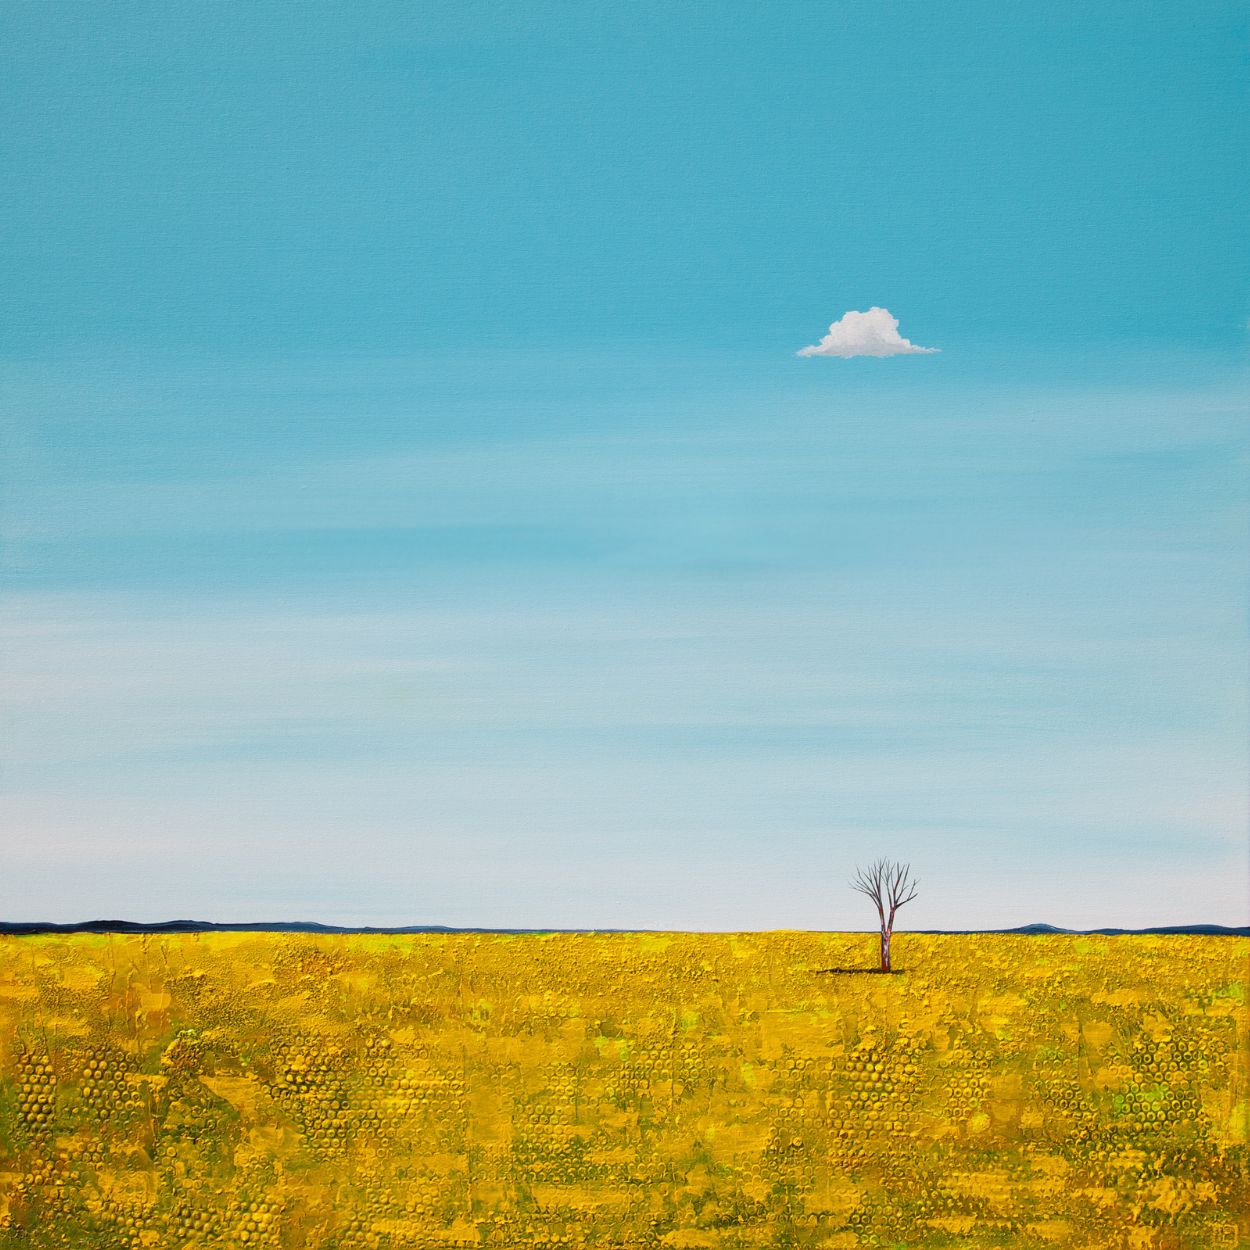 &#39; STANDING ALONE IN THE FIELDS OF GOLD &#39; - BY TANIA CHANTER